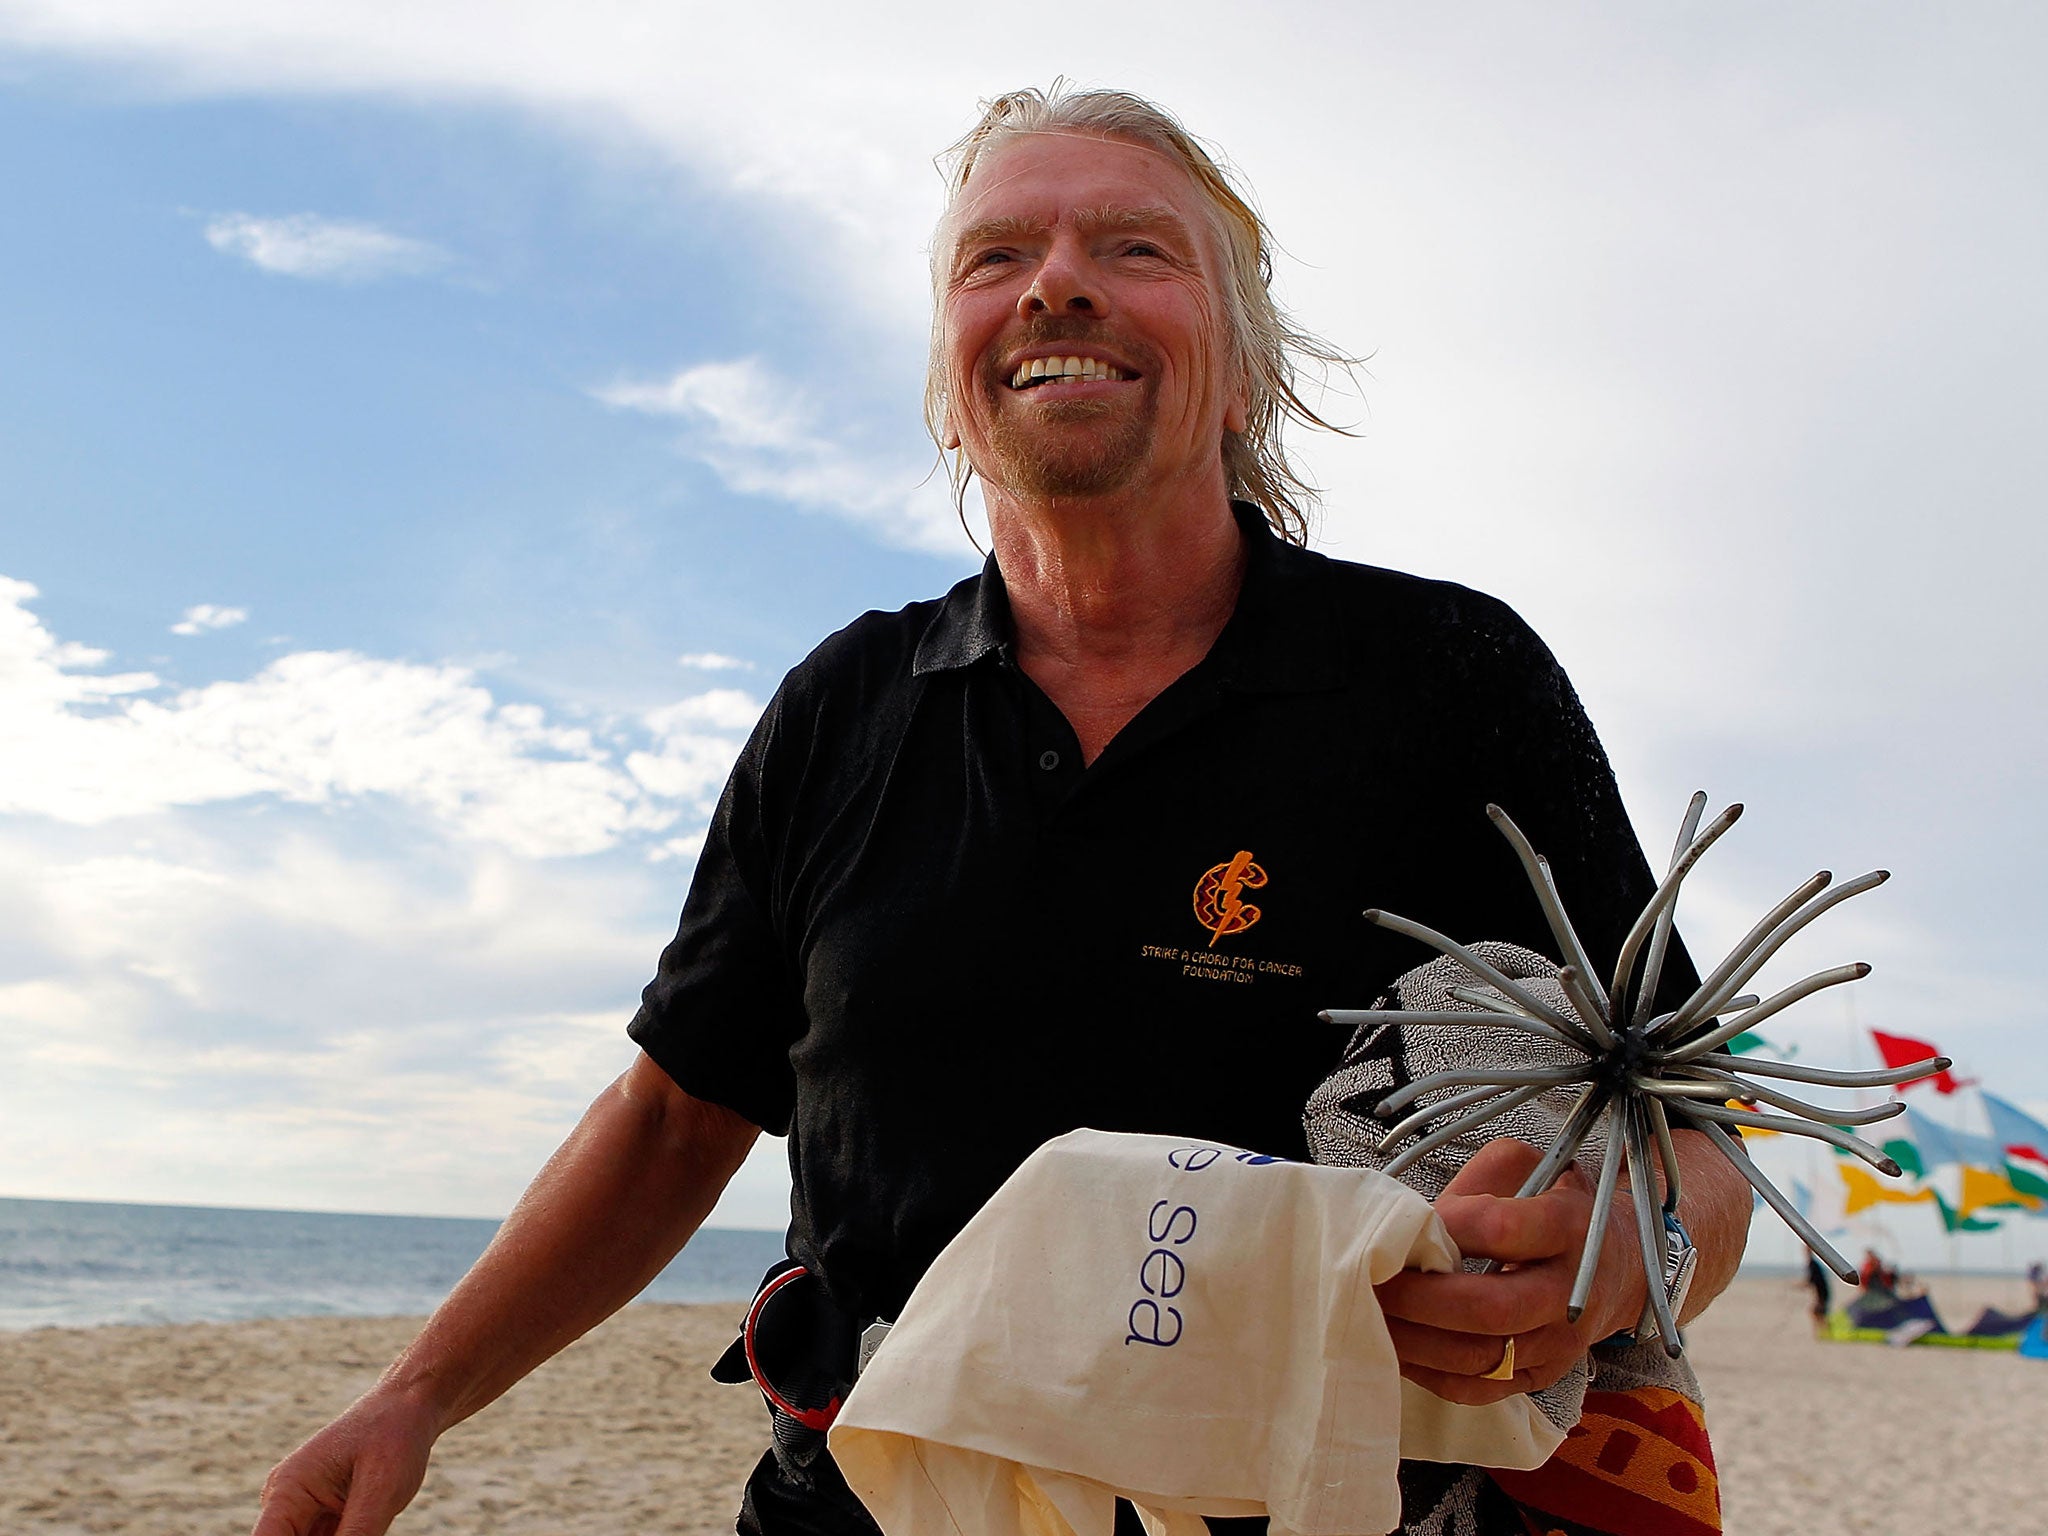 Richard Branson said children 'may well learn more [on family holidays] than they ever could in a classroom'